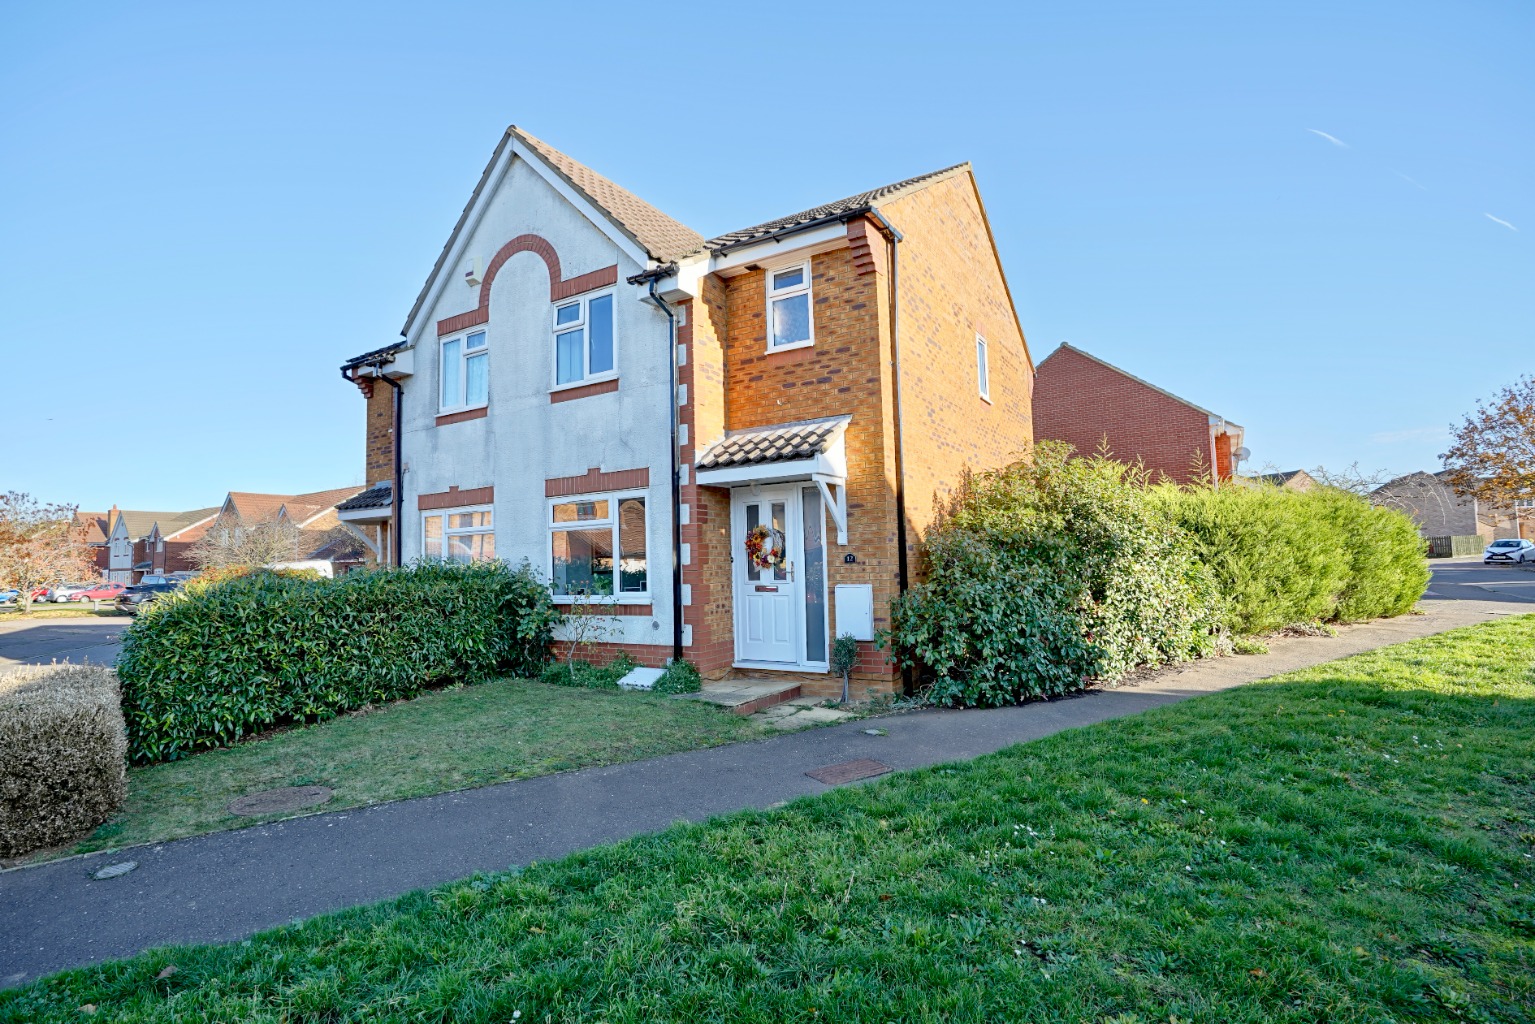 3 bed semi-detached house for sale in Lomax Drive, Huntingdon - Property Image 1